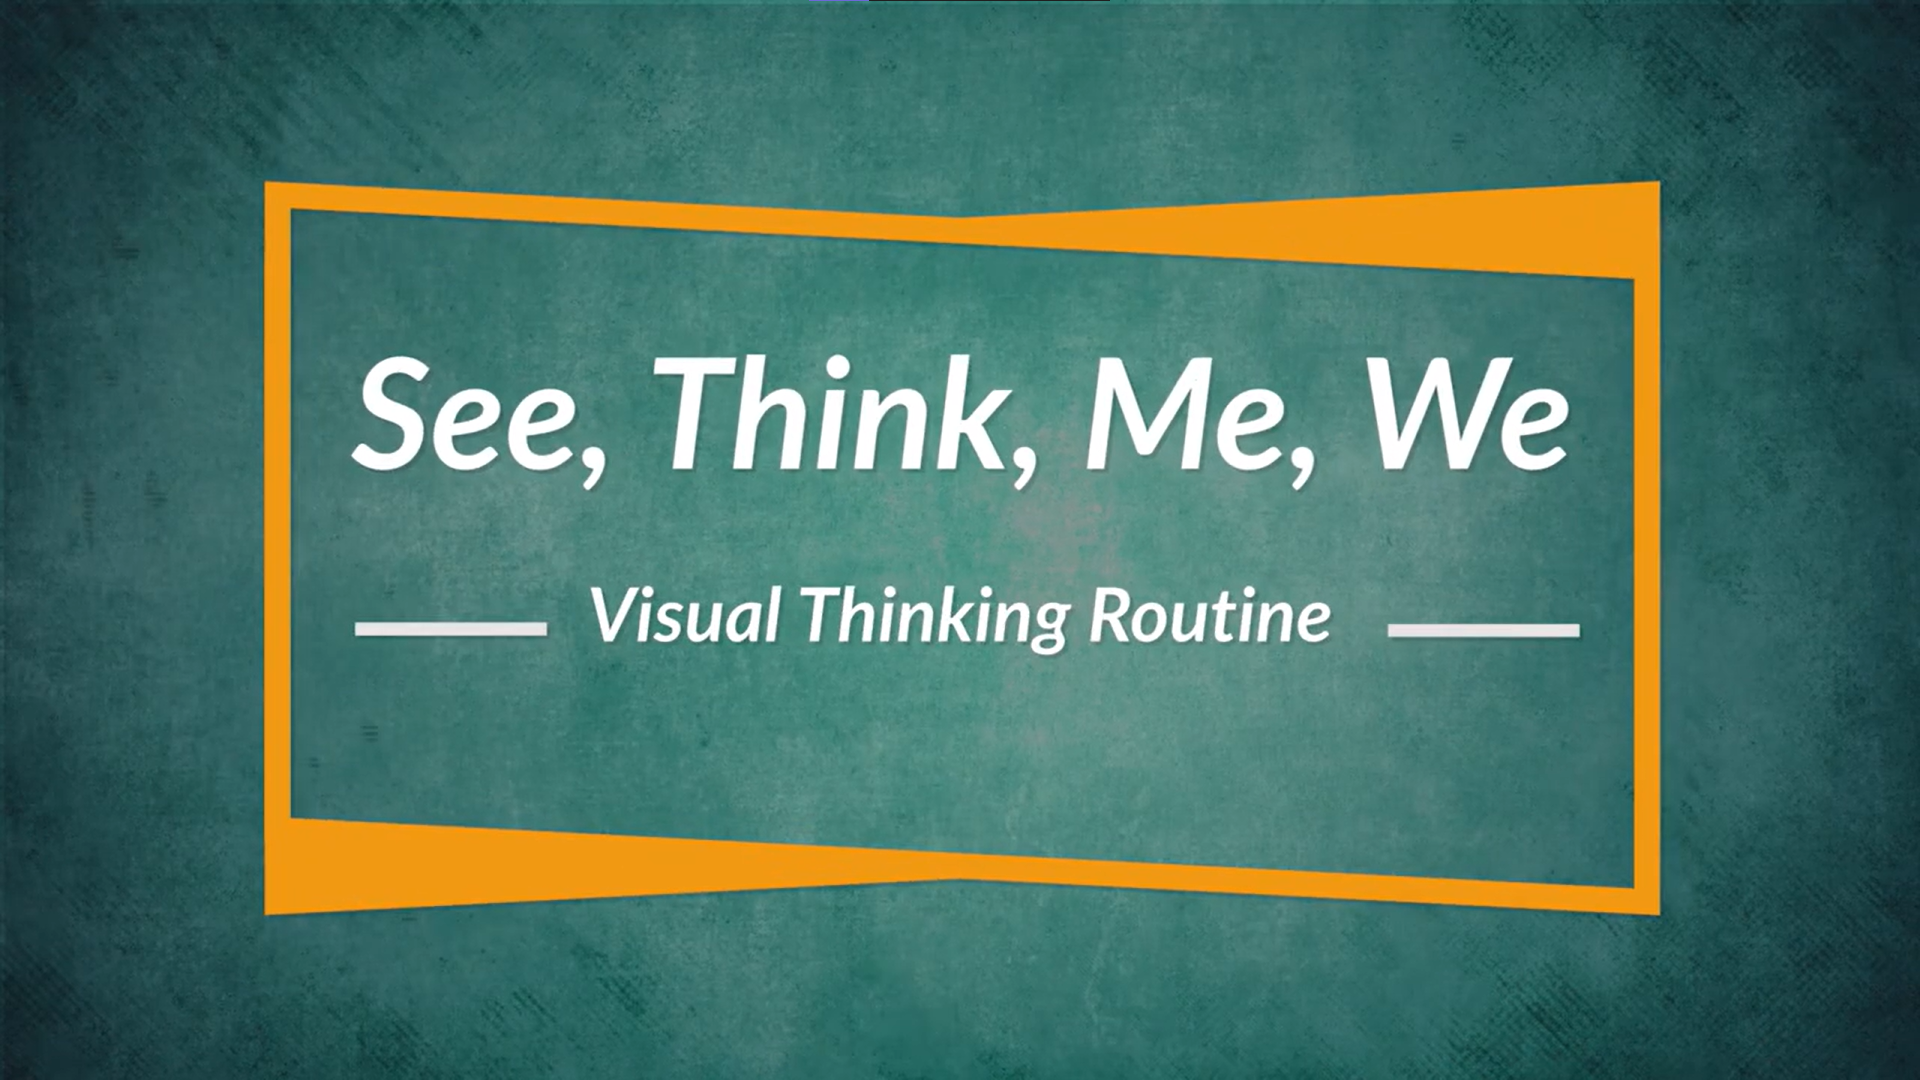 Cover image for the "See, Think, Me, We" Visual Thinking Strategy